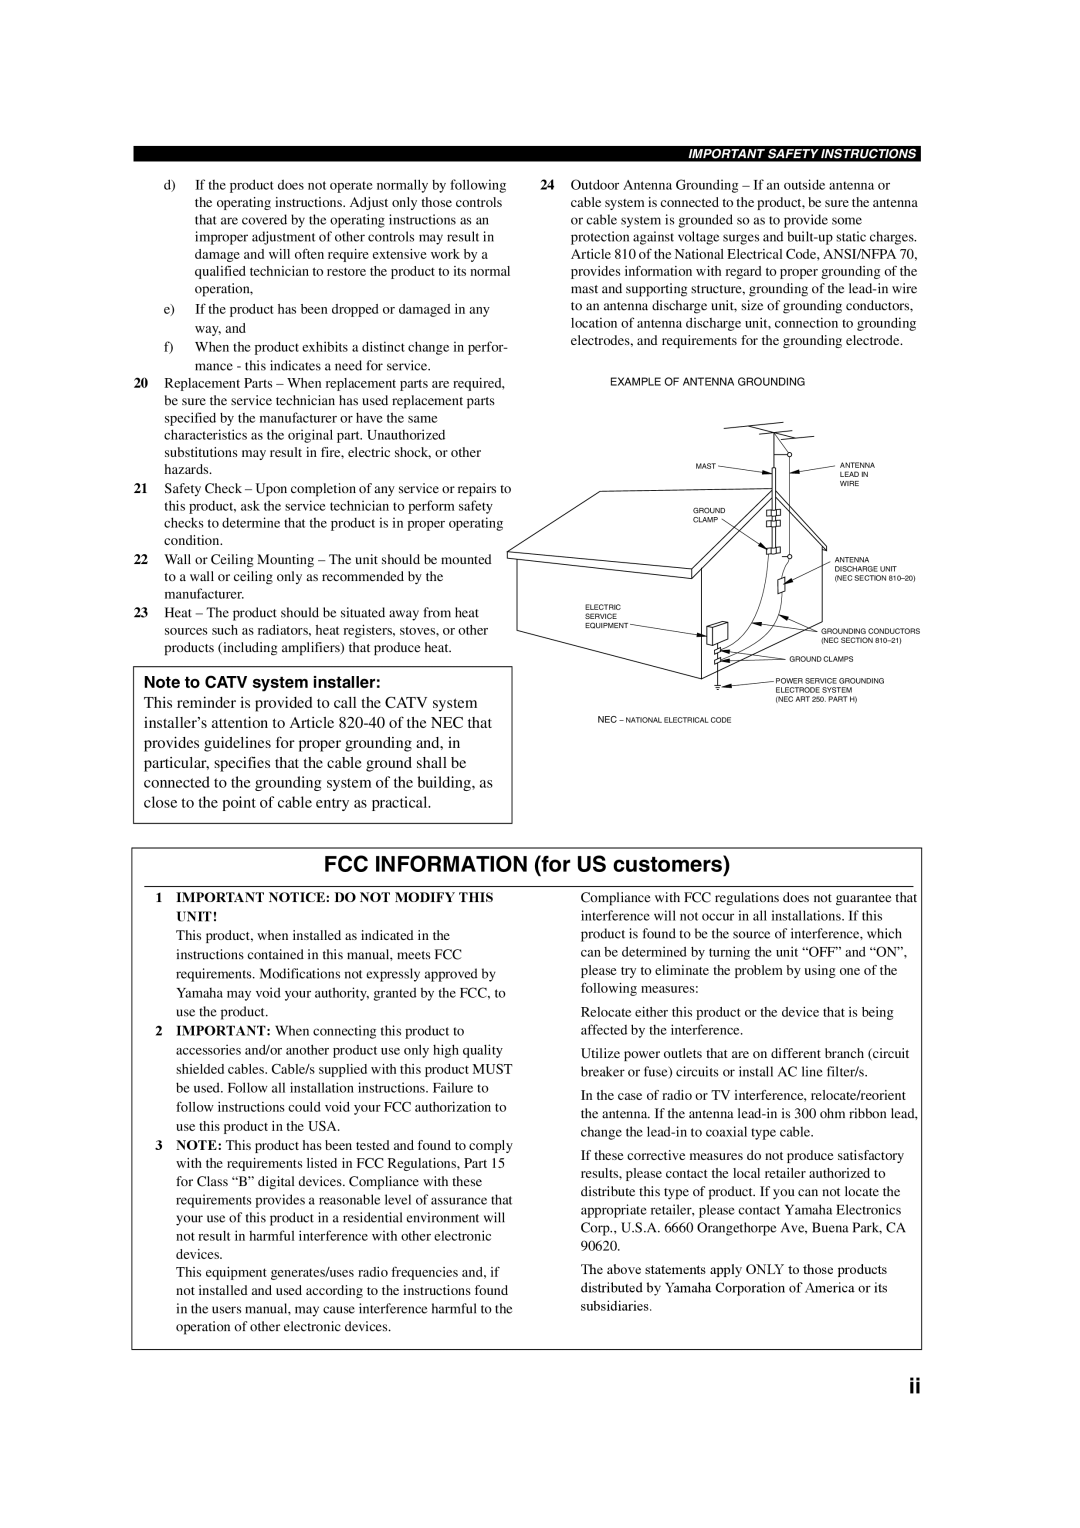 Yamaha HTR-6090 owner manual FCC INFORMATION for US customers, Note to CATV system installer 